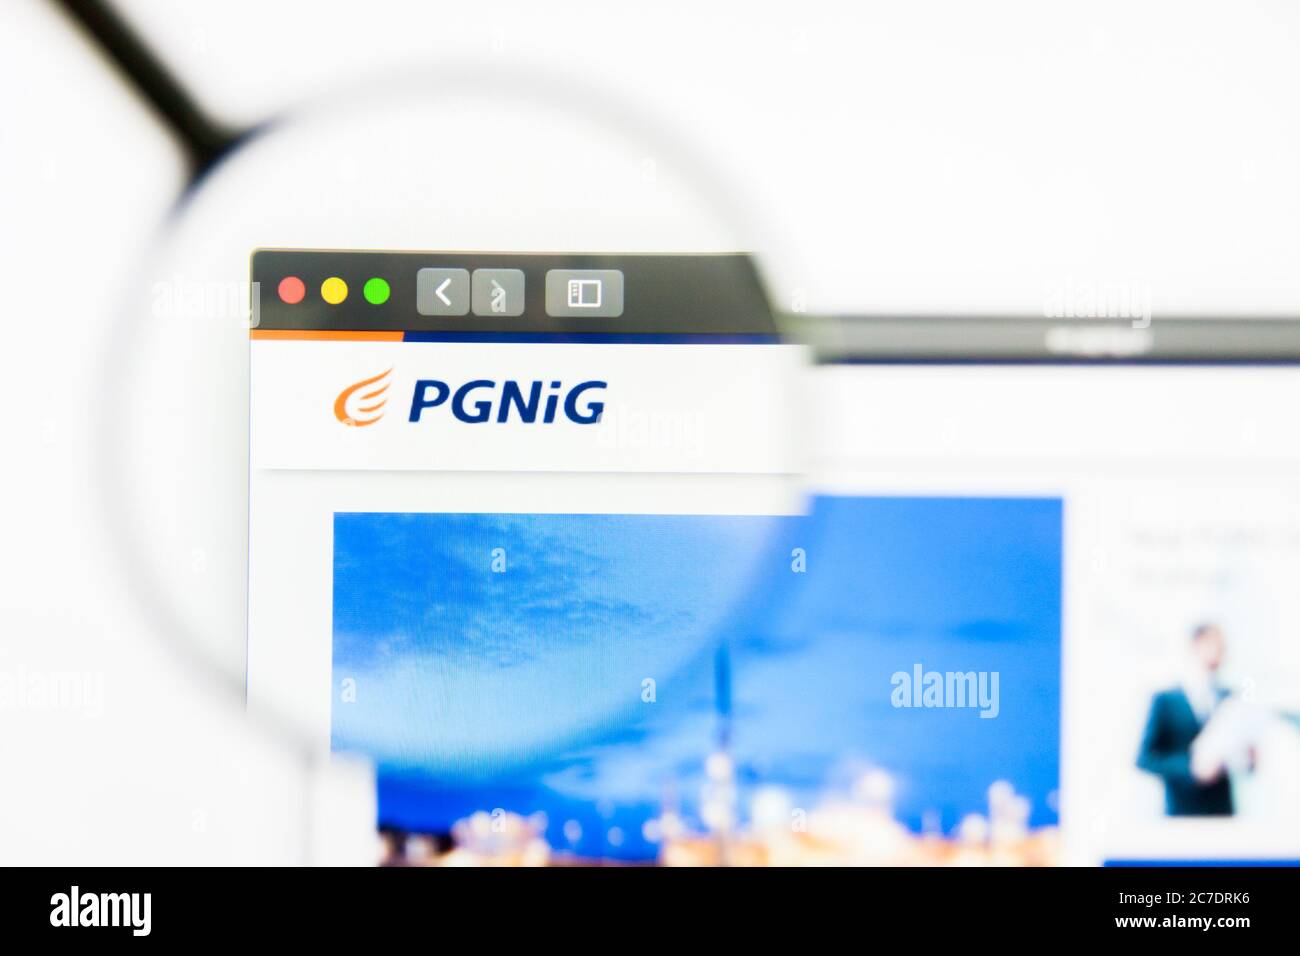 Los Angeles, California, USA - 25 March 2019: Illustrative Editorial of Pgnig Group website homepage. Pgnig Group logo visible on display screen. Stock Photo